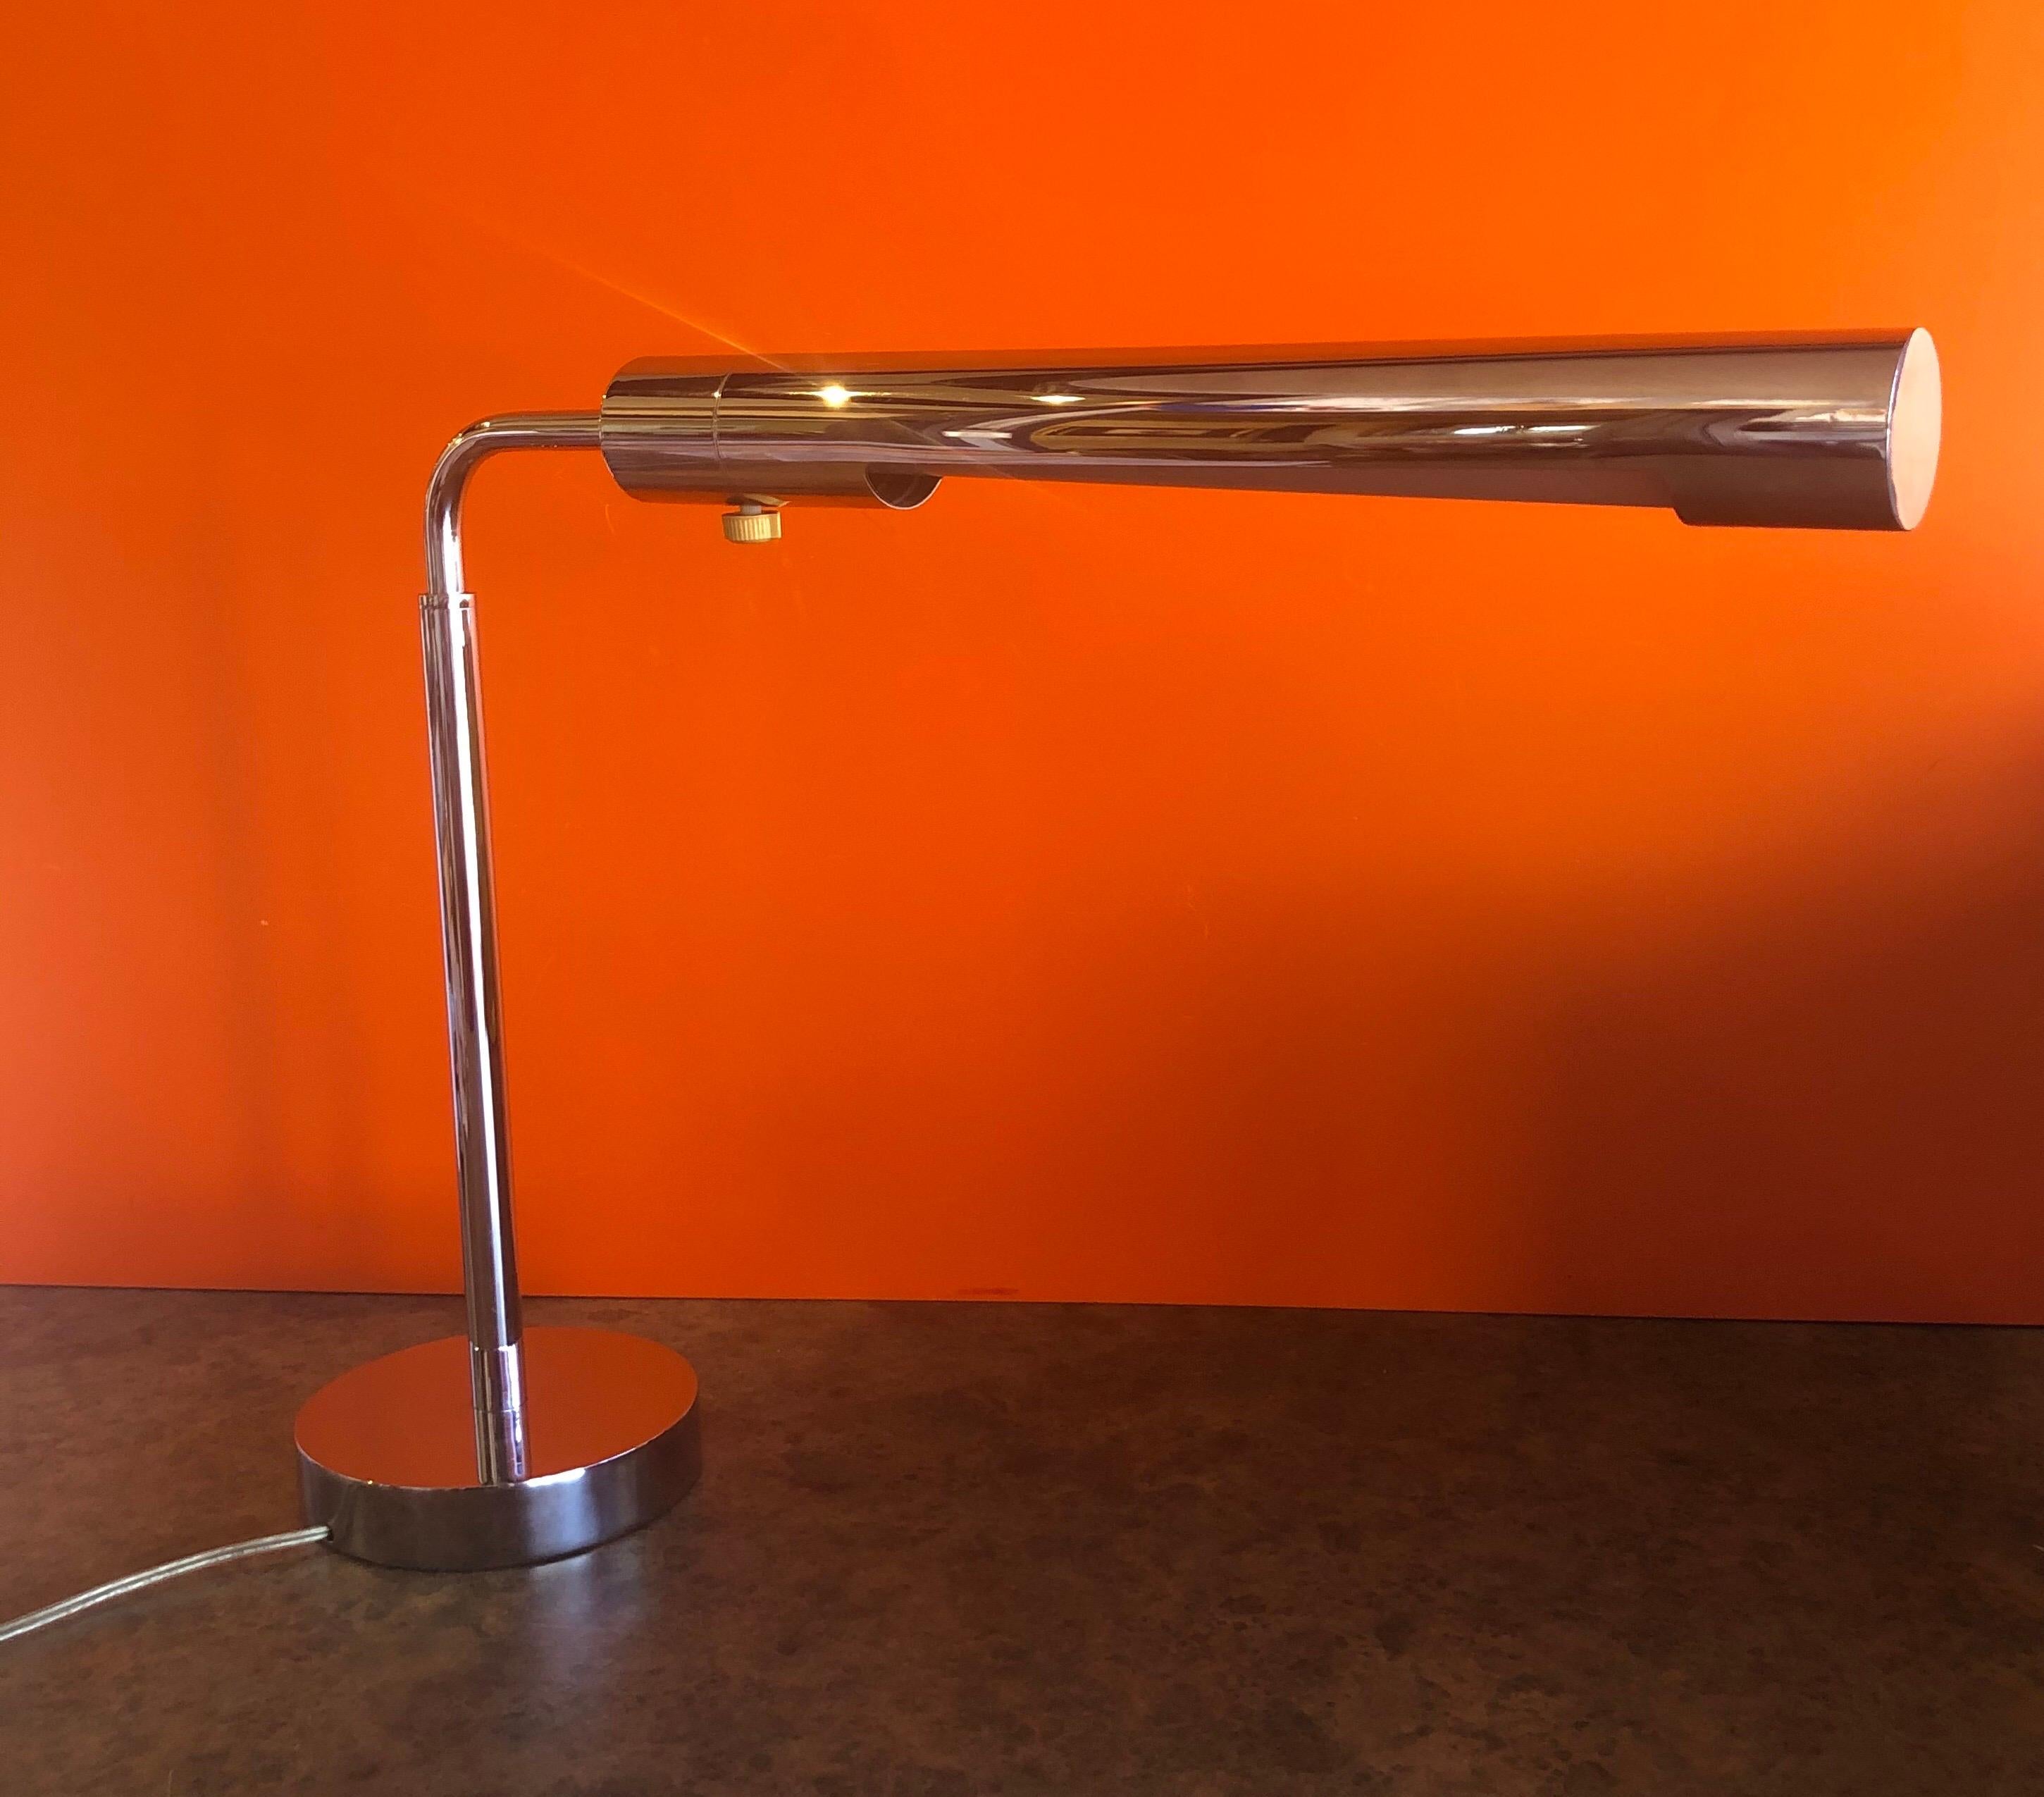 A very nice midcentury adjustable chrome pharmacy desk lamp with elongated shade in the style of Koch & Lowy, circa 1960s. The telescoping lamp can adjust from height of 15.25